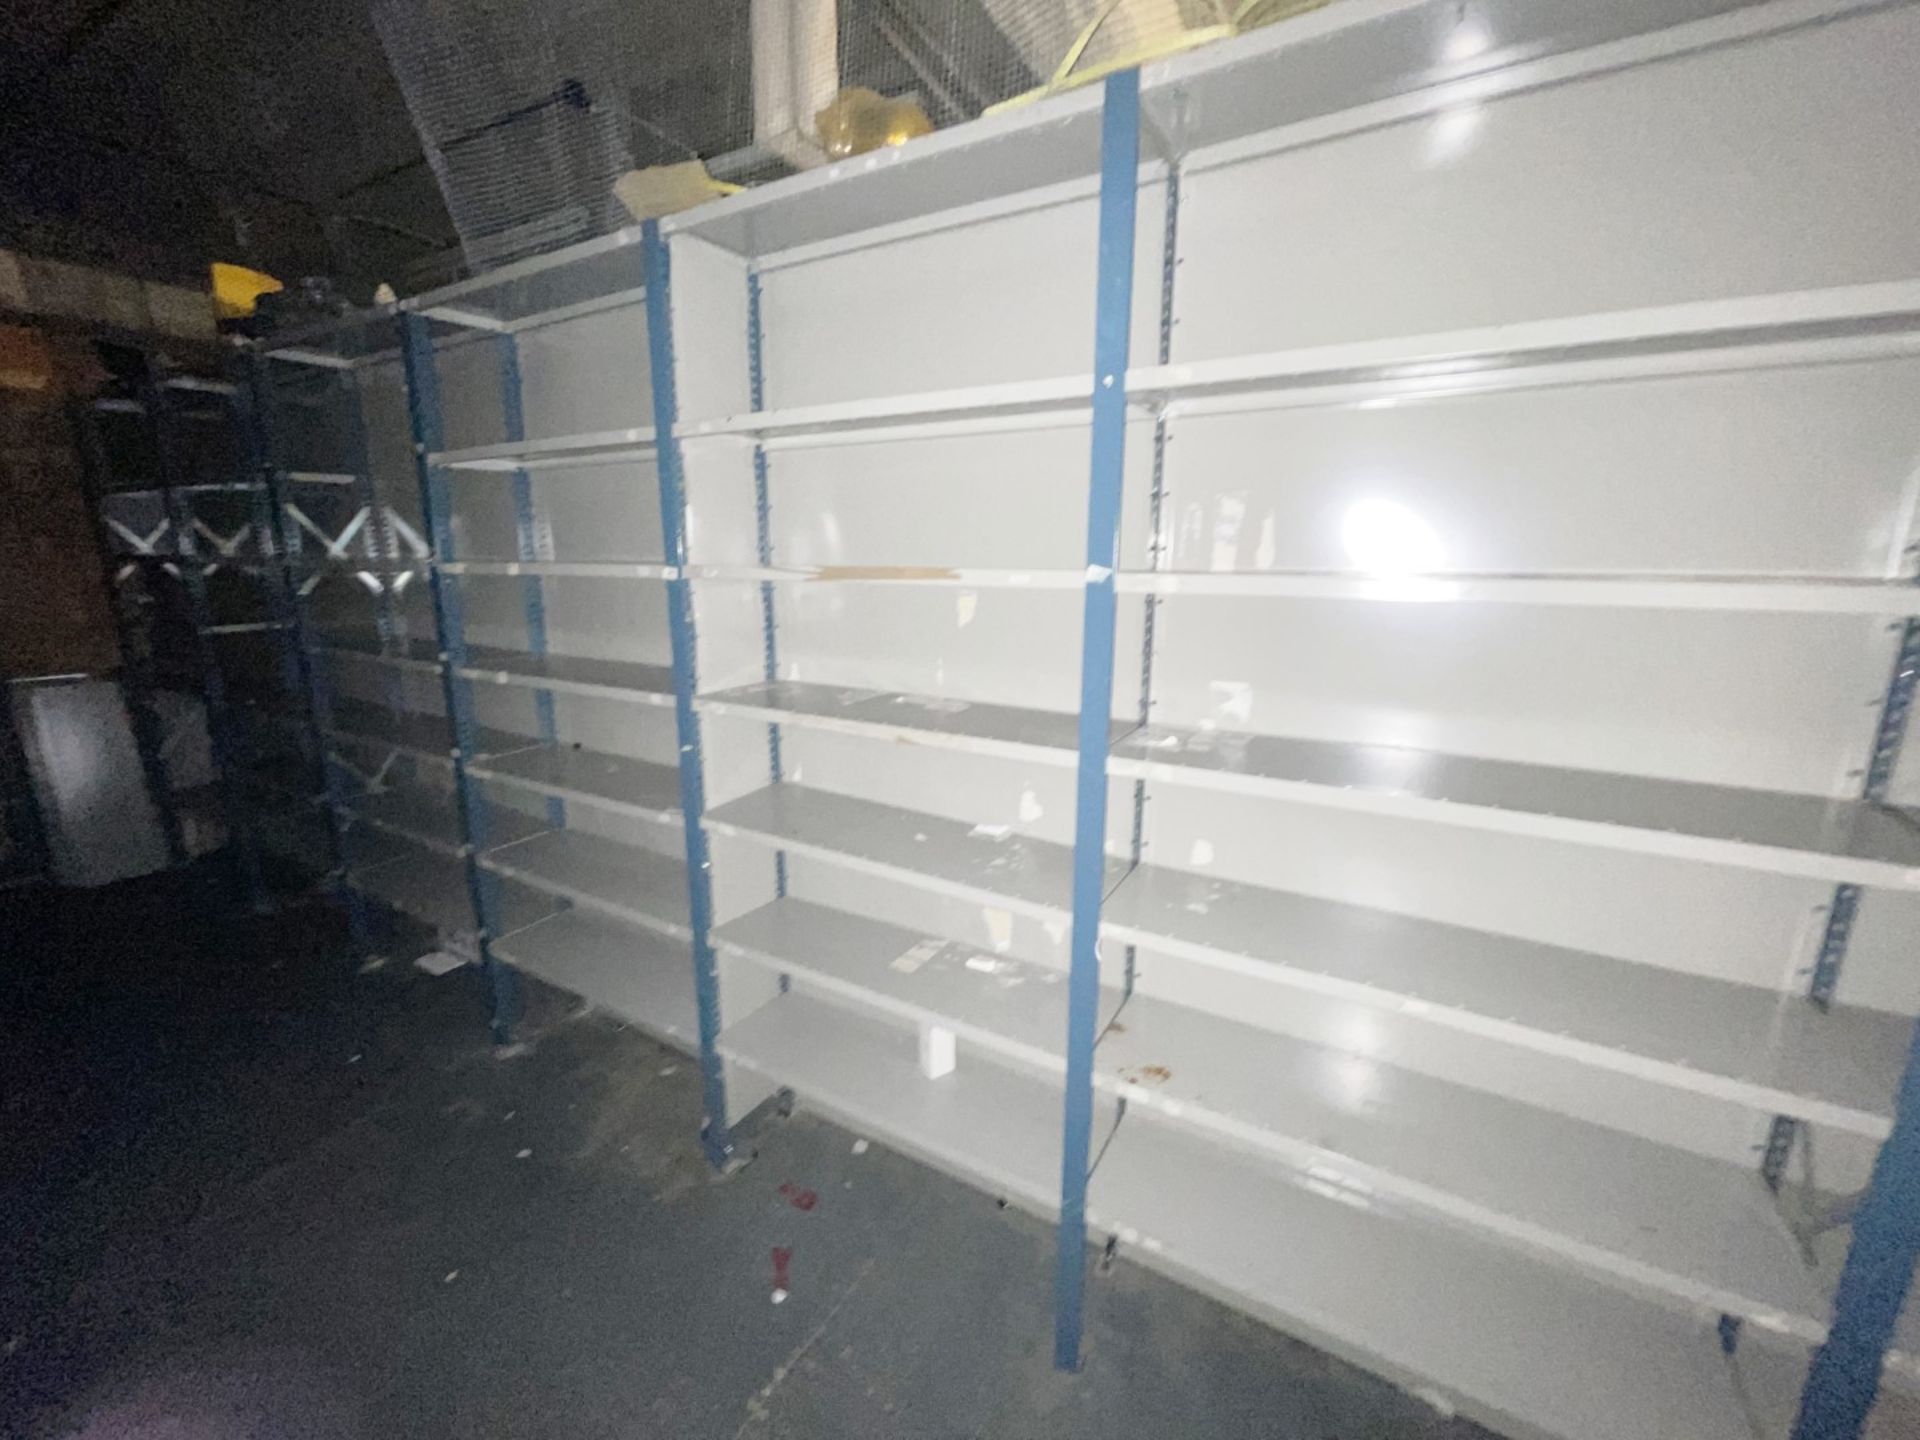 8 x Bays of Metal Warehouse Storage Shelving - Plus Additional Shelves - 100cm Width Per Bay - CL670